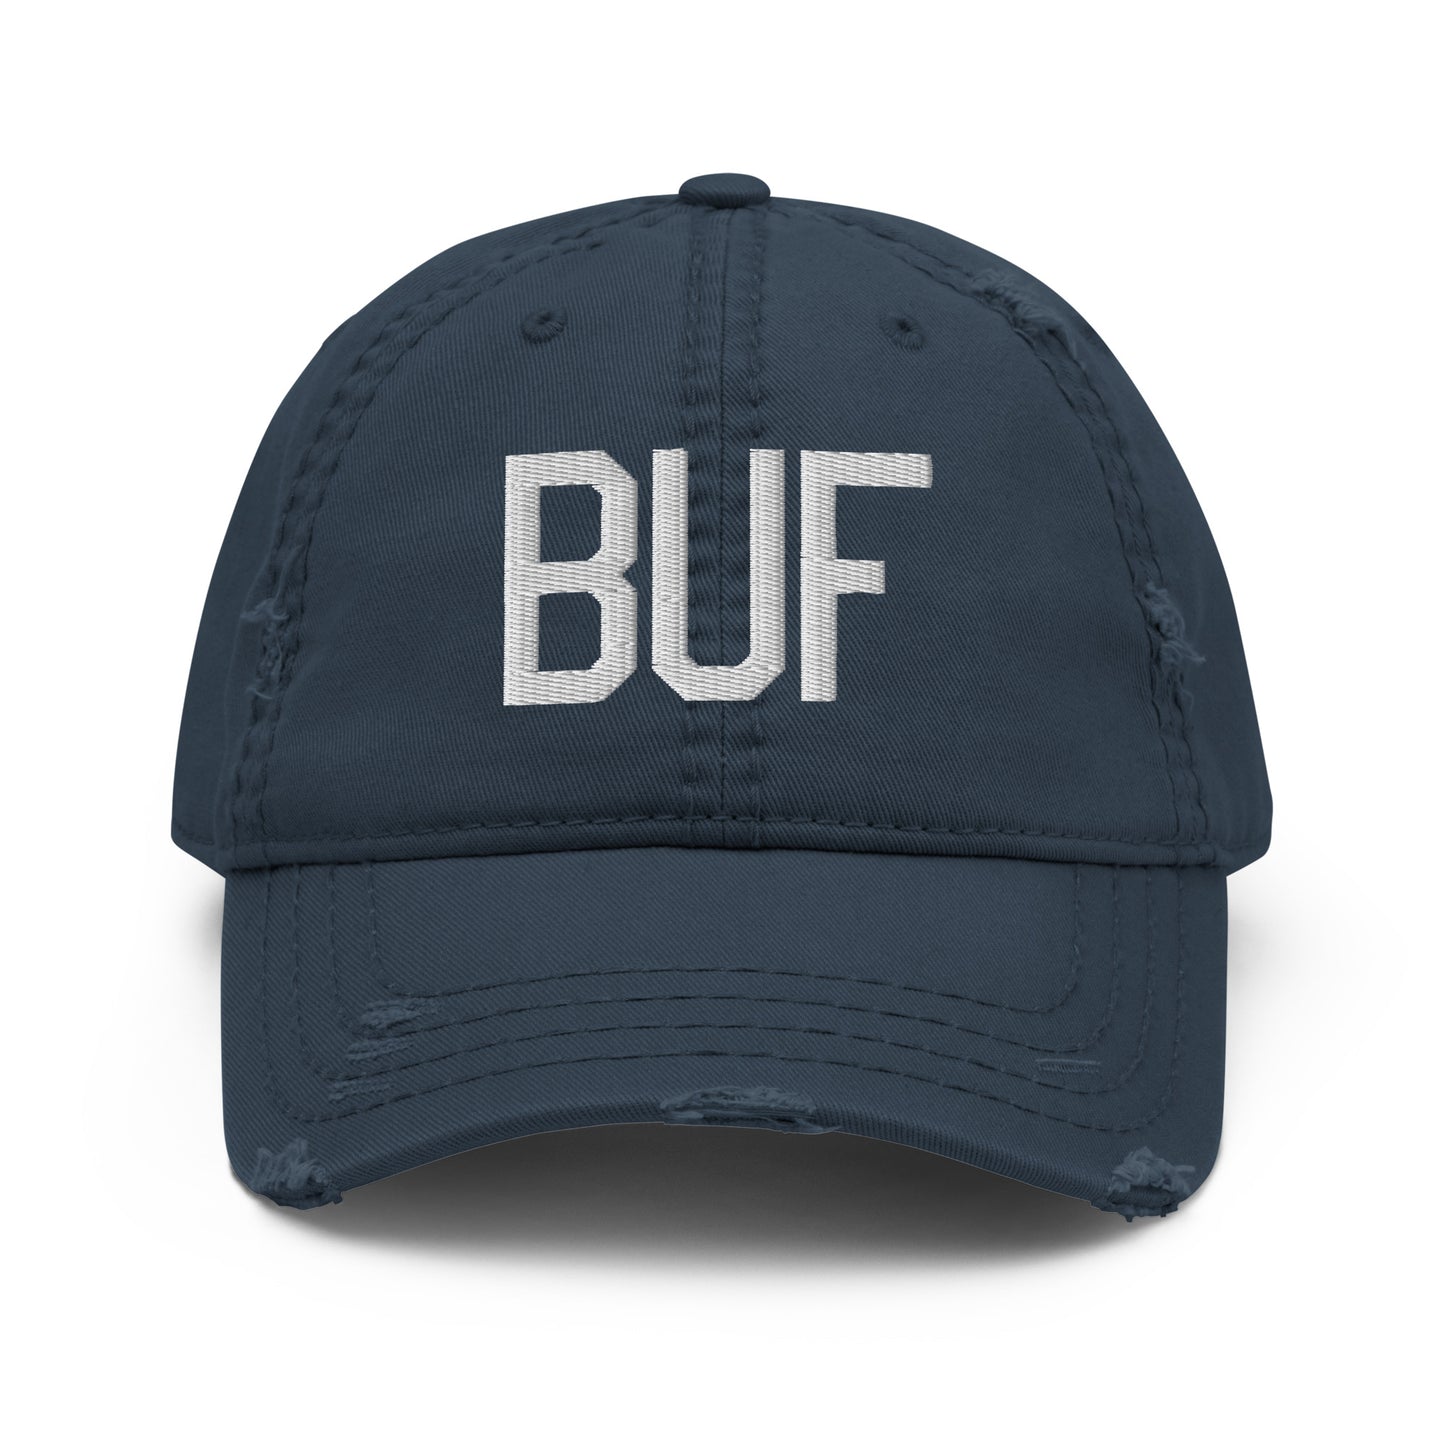 Airport Code Distressed Hat - White • BUF Buffalo • YHM Designs - Image 13